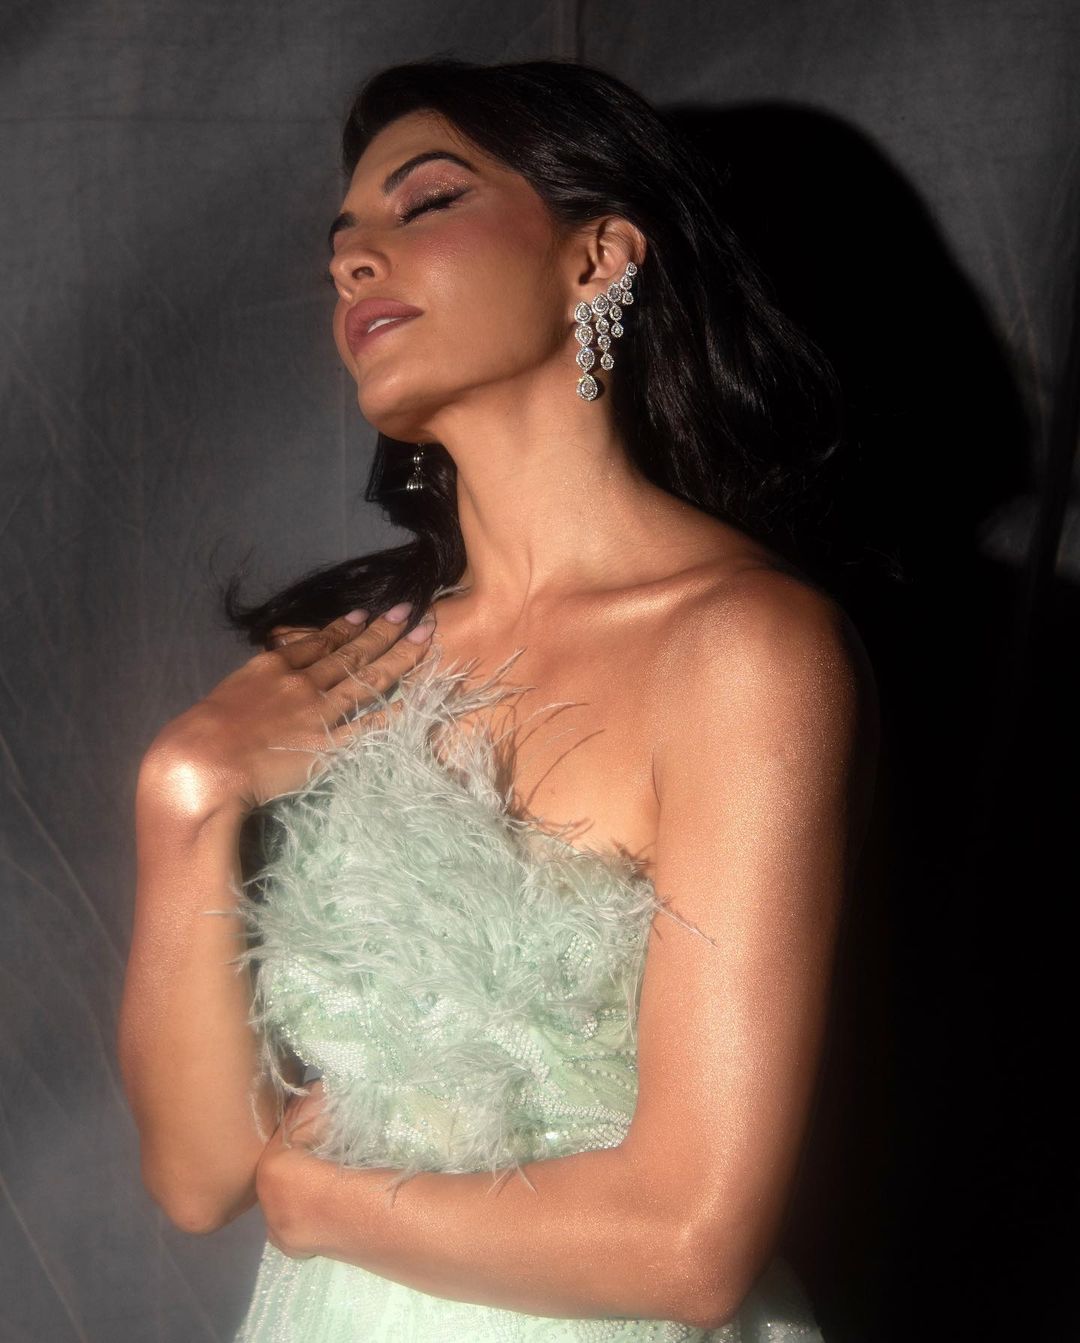 Jacqueline Fernandez does a hot photoshoot in a light green gown, fans in awe of her new avatar